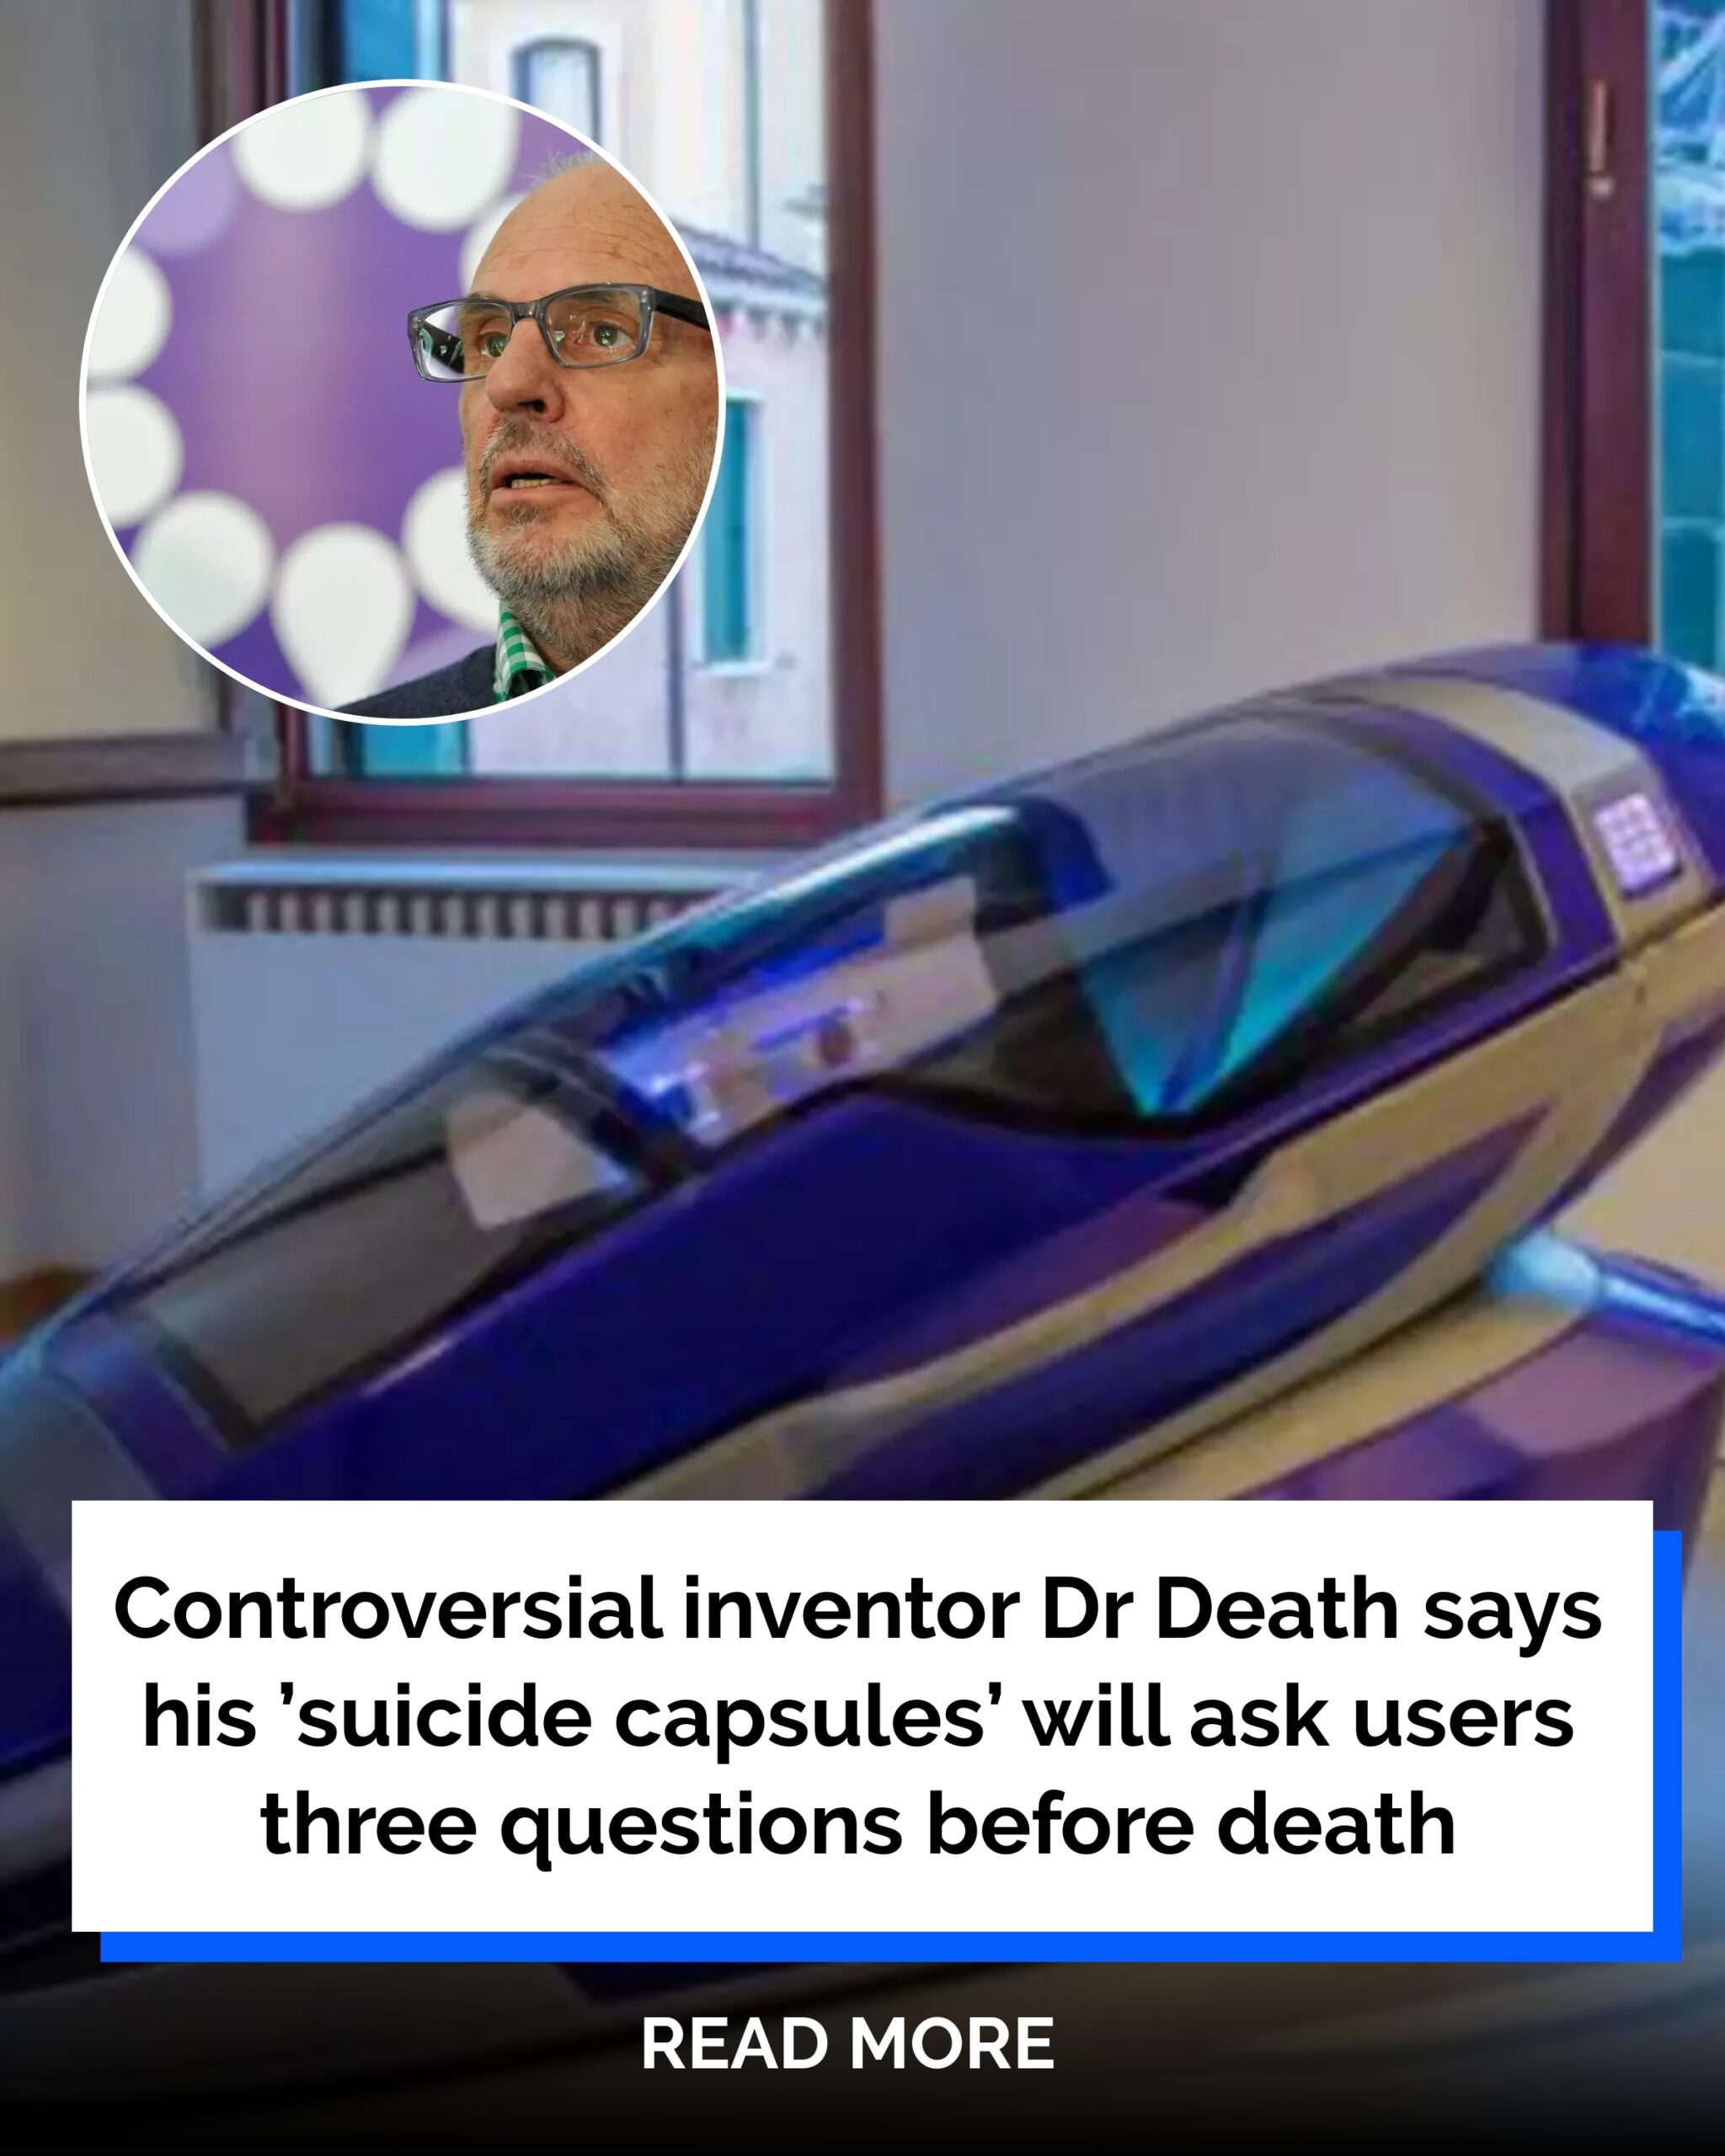 Controversial Inventor Dr. Death Says His ‘Suicide Capsules’ Will Ask Users Three Questions Before Death